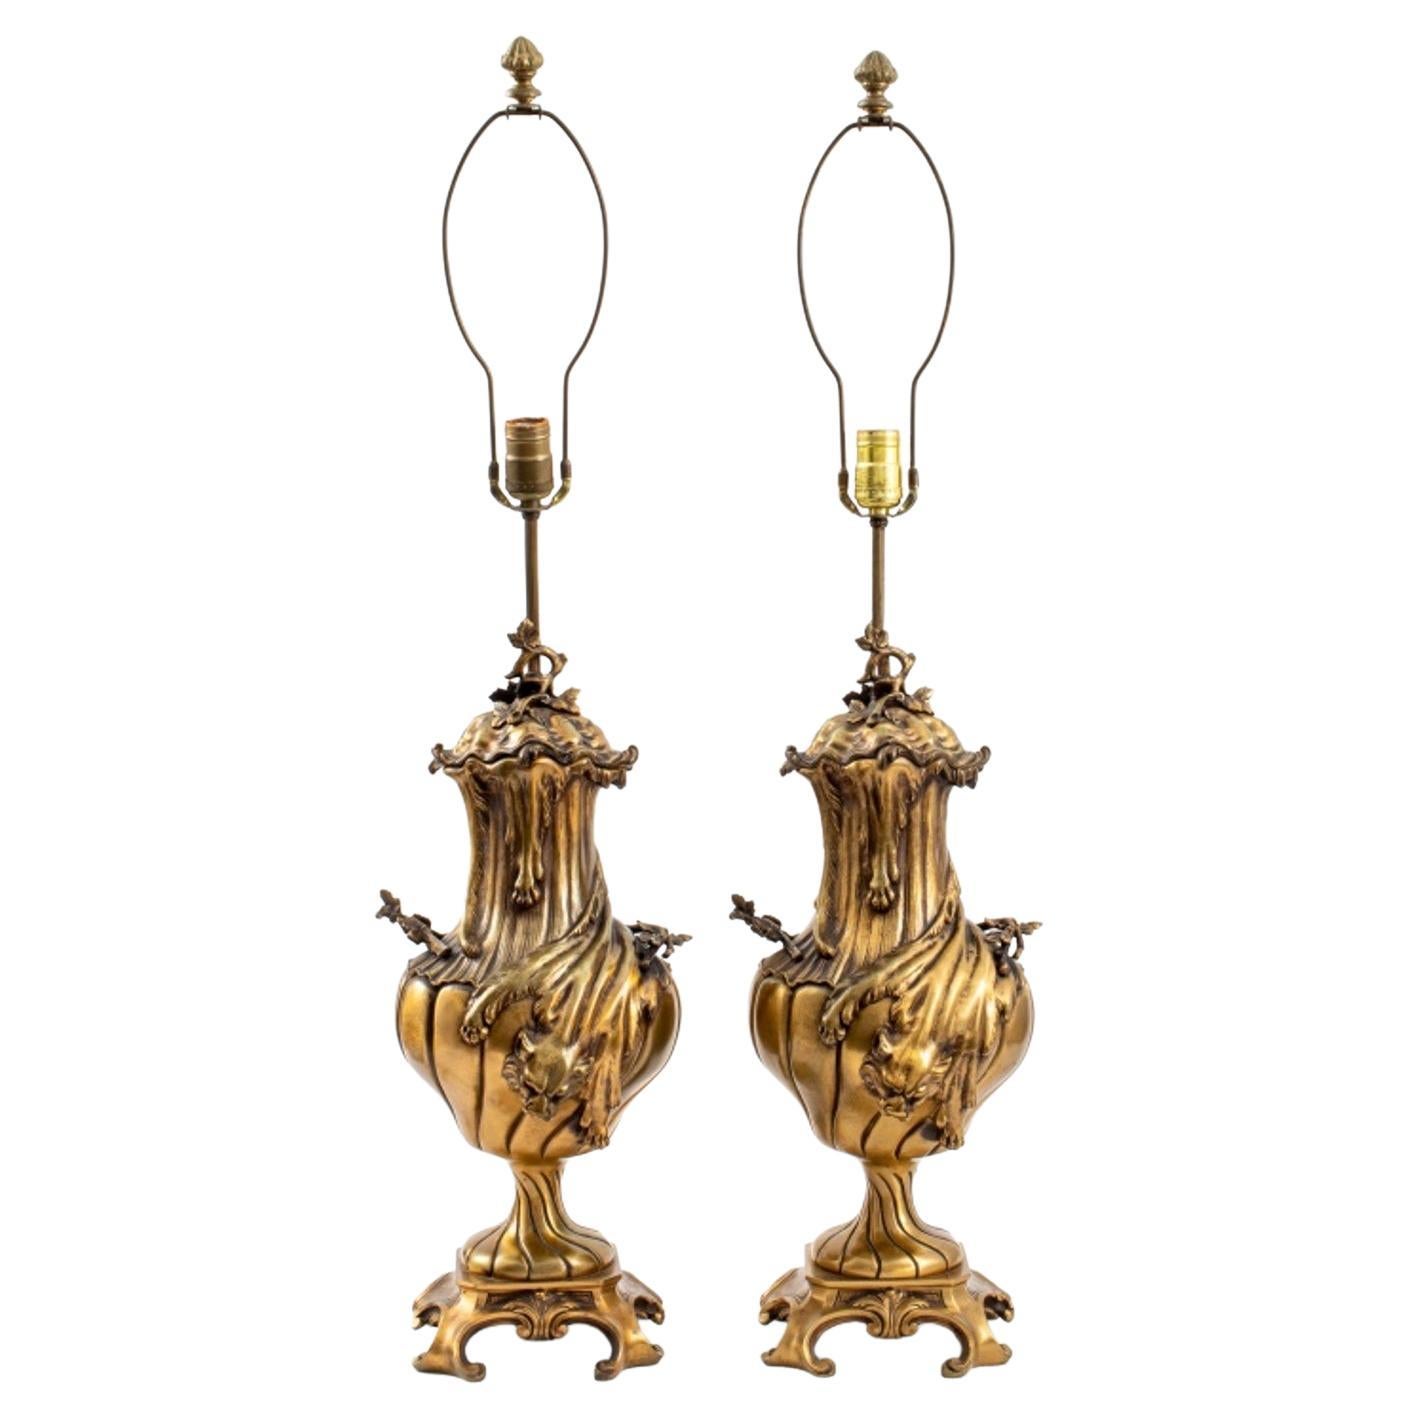 Italian Baroque Revival Style Bronze Lamps, Pair For Sale